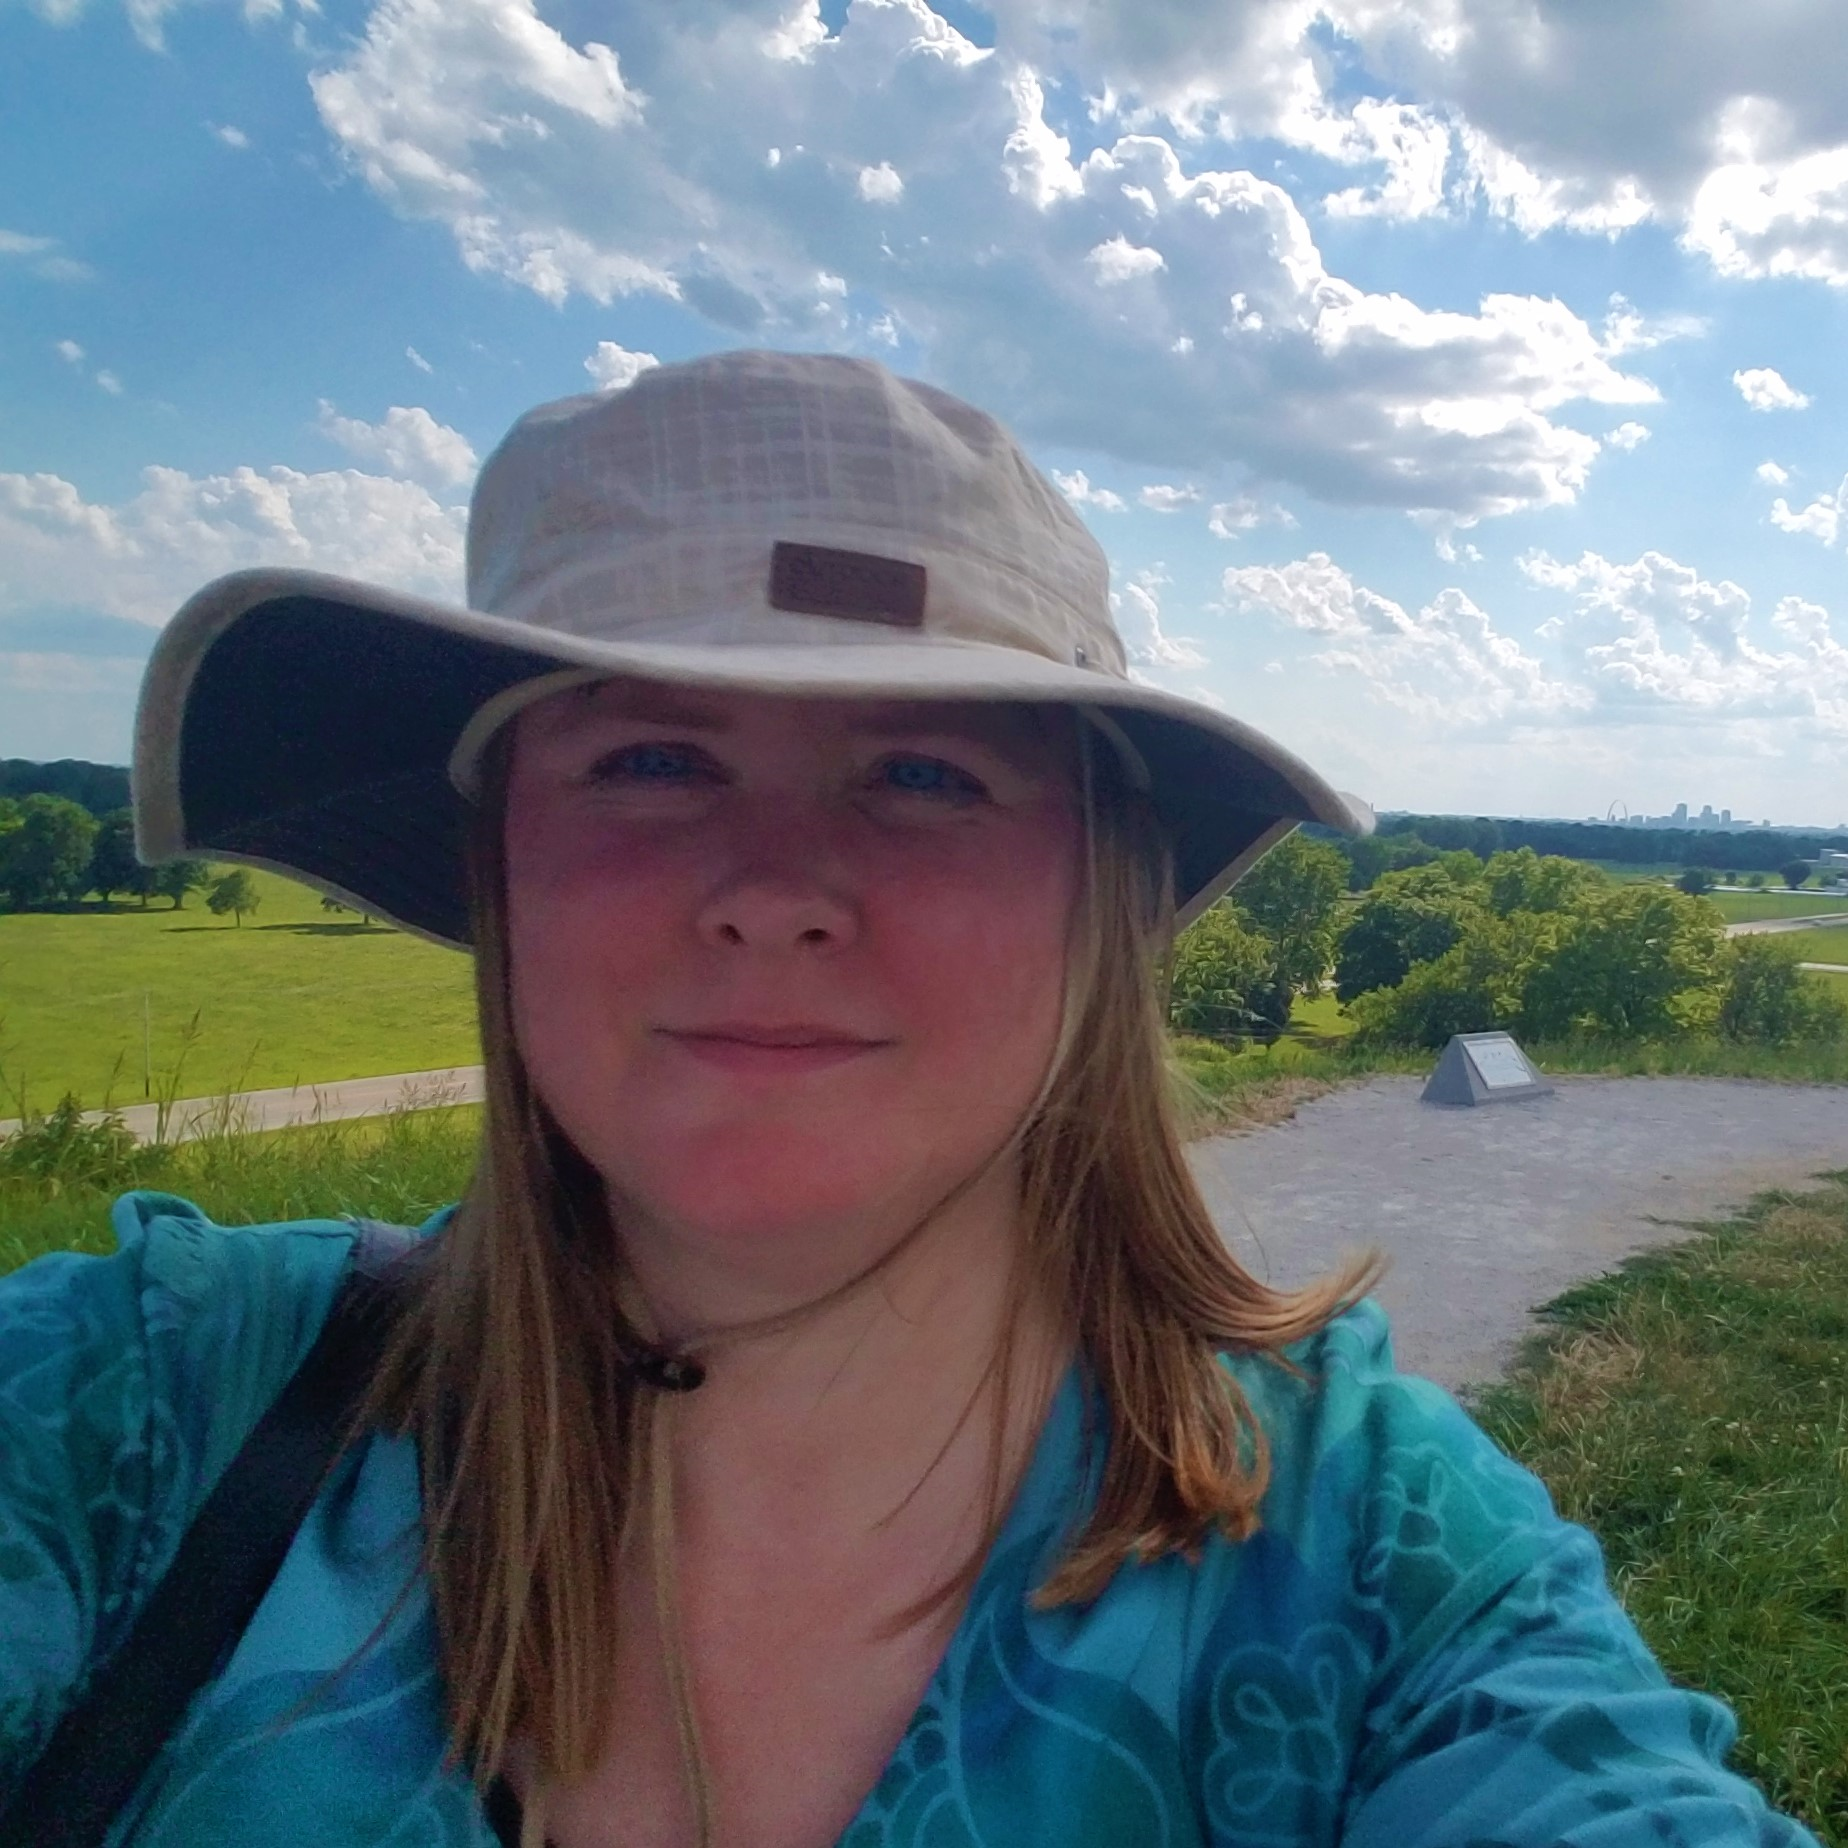 Selfie of blonde haired author wearing brimmed hat. An expanse of nature is the background.